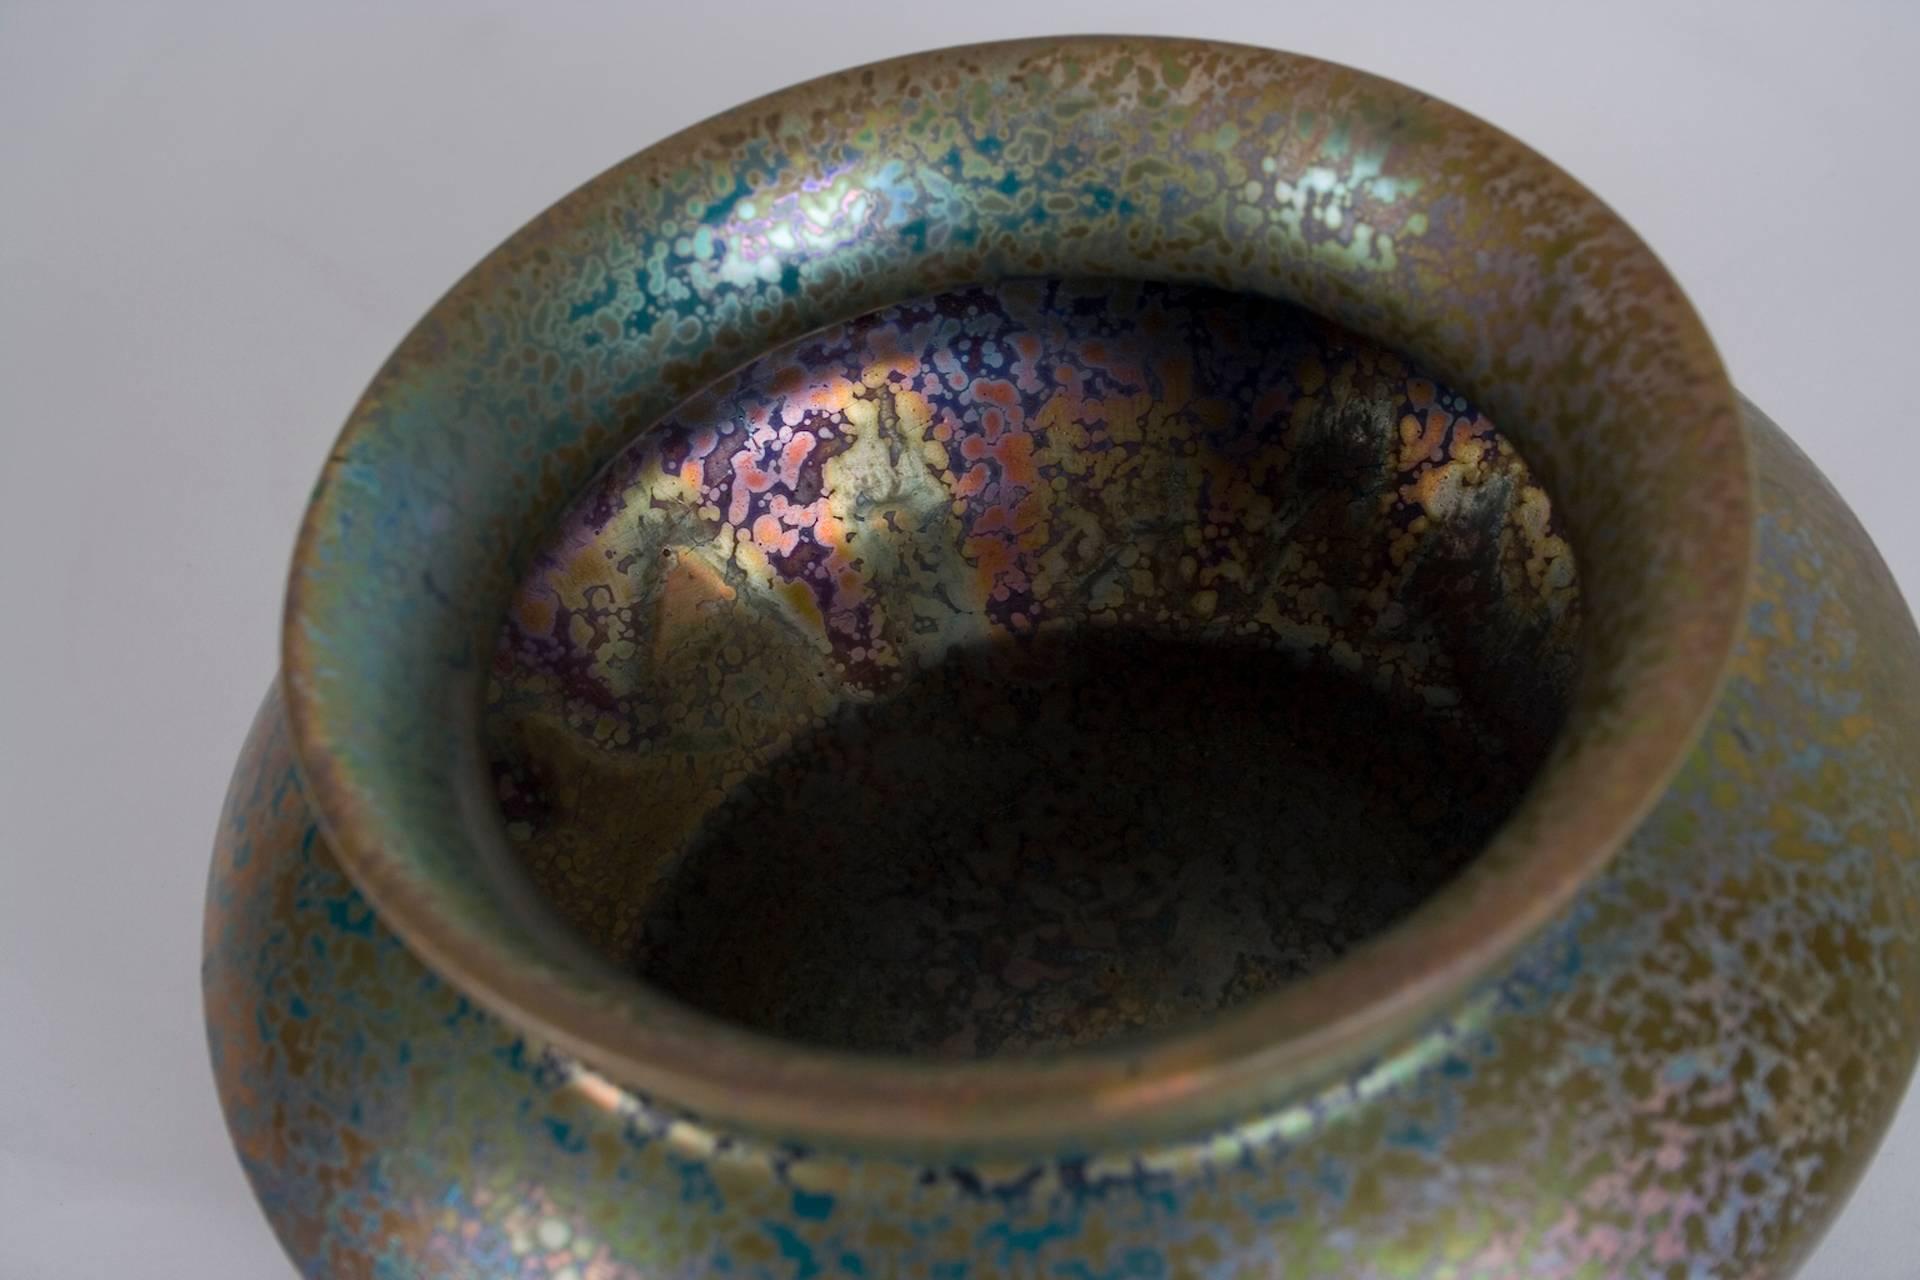 A French Art Nouveau period bowl by Clement Massier, circa 1900. Unusual Grecian form with brilliant textured iridescent glaze. 

Massier (1845-1917), member of a family dynasty of potters, is credited with reviving the ceramics industry in